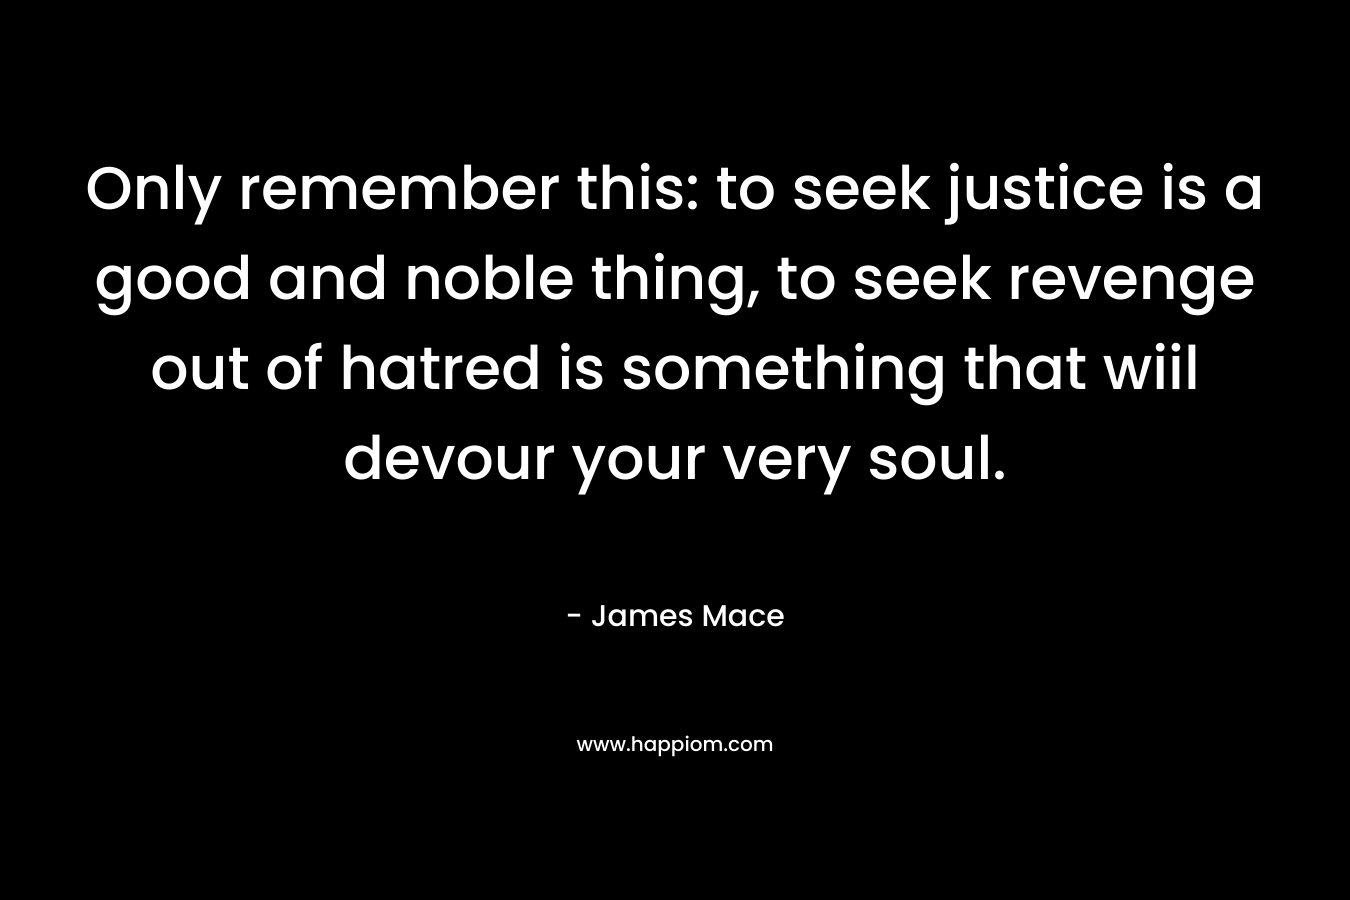 Only remember this: to seek justice is a good and noble thing, to seek revenge out of hatred is something that wiil devour your very soul. – James Mace